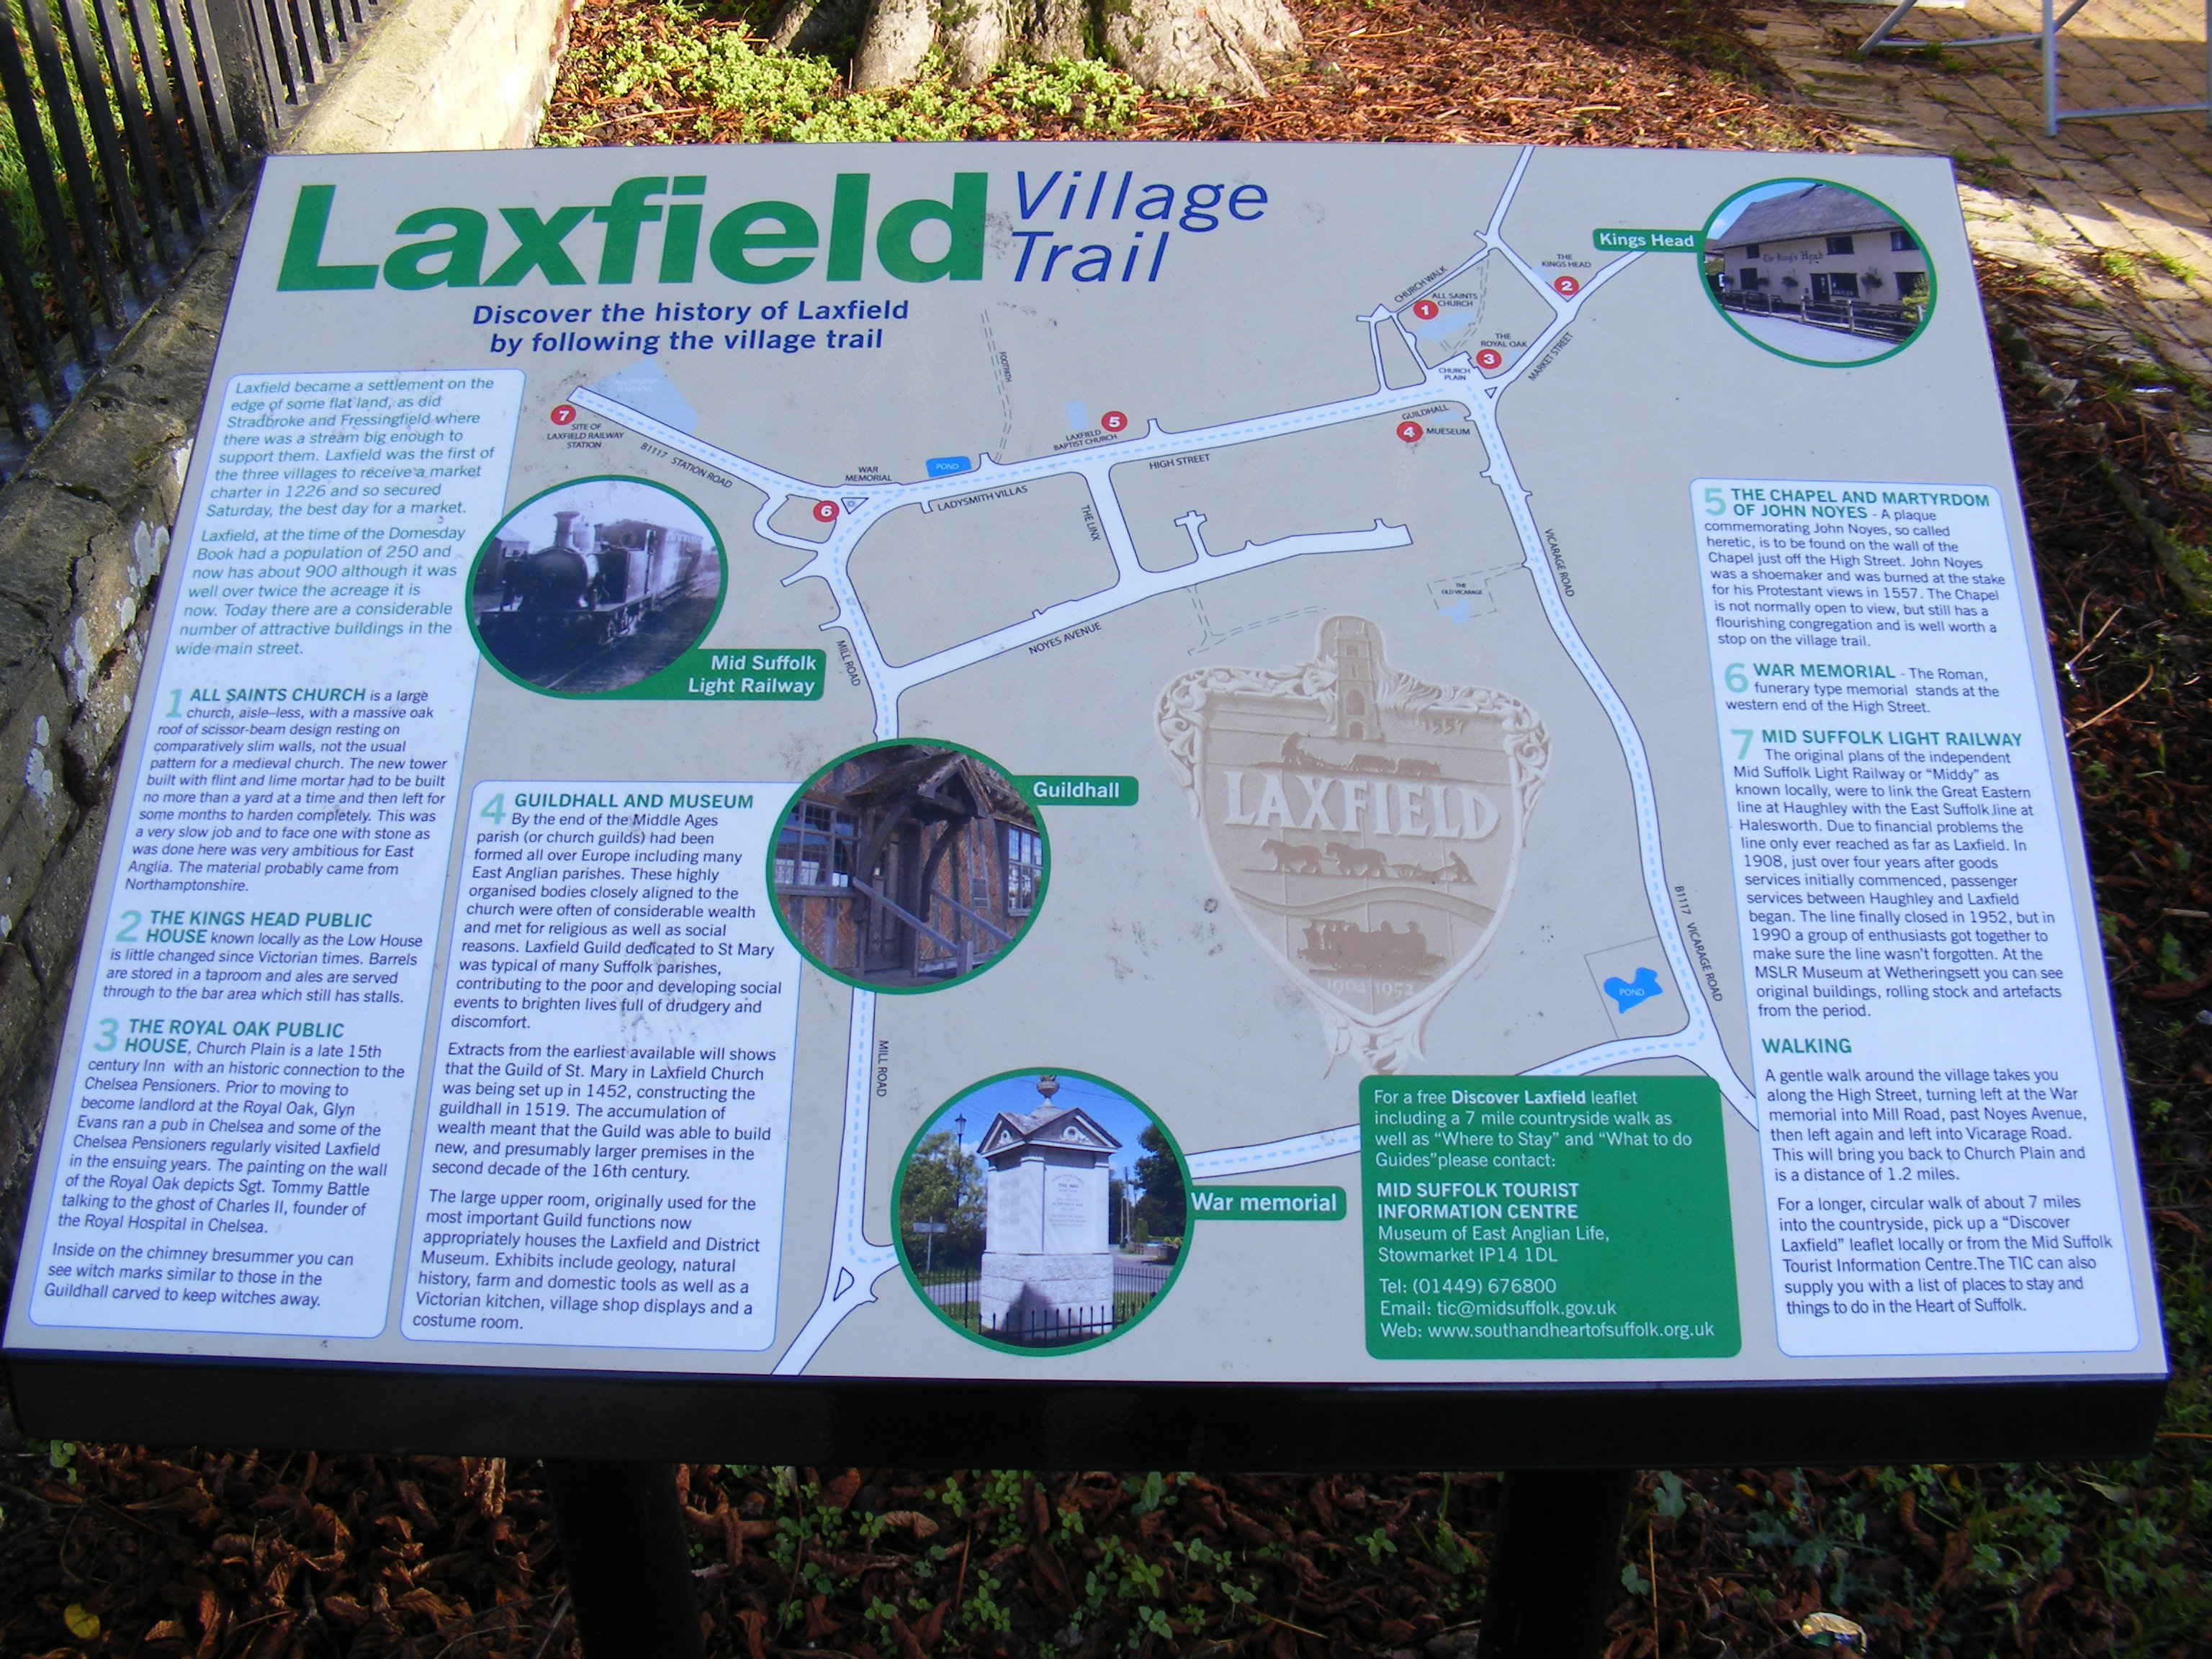 Laxfield_Village_Trail_Sign_-_geograph.org.uk_-_1597978.jpg